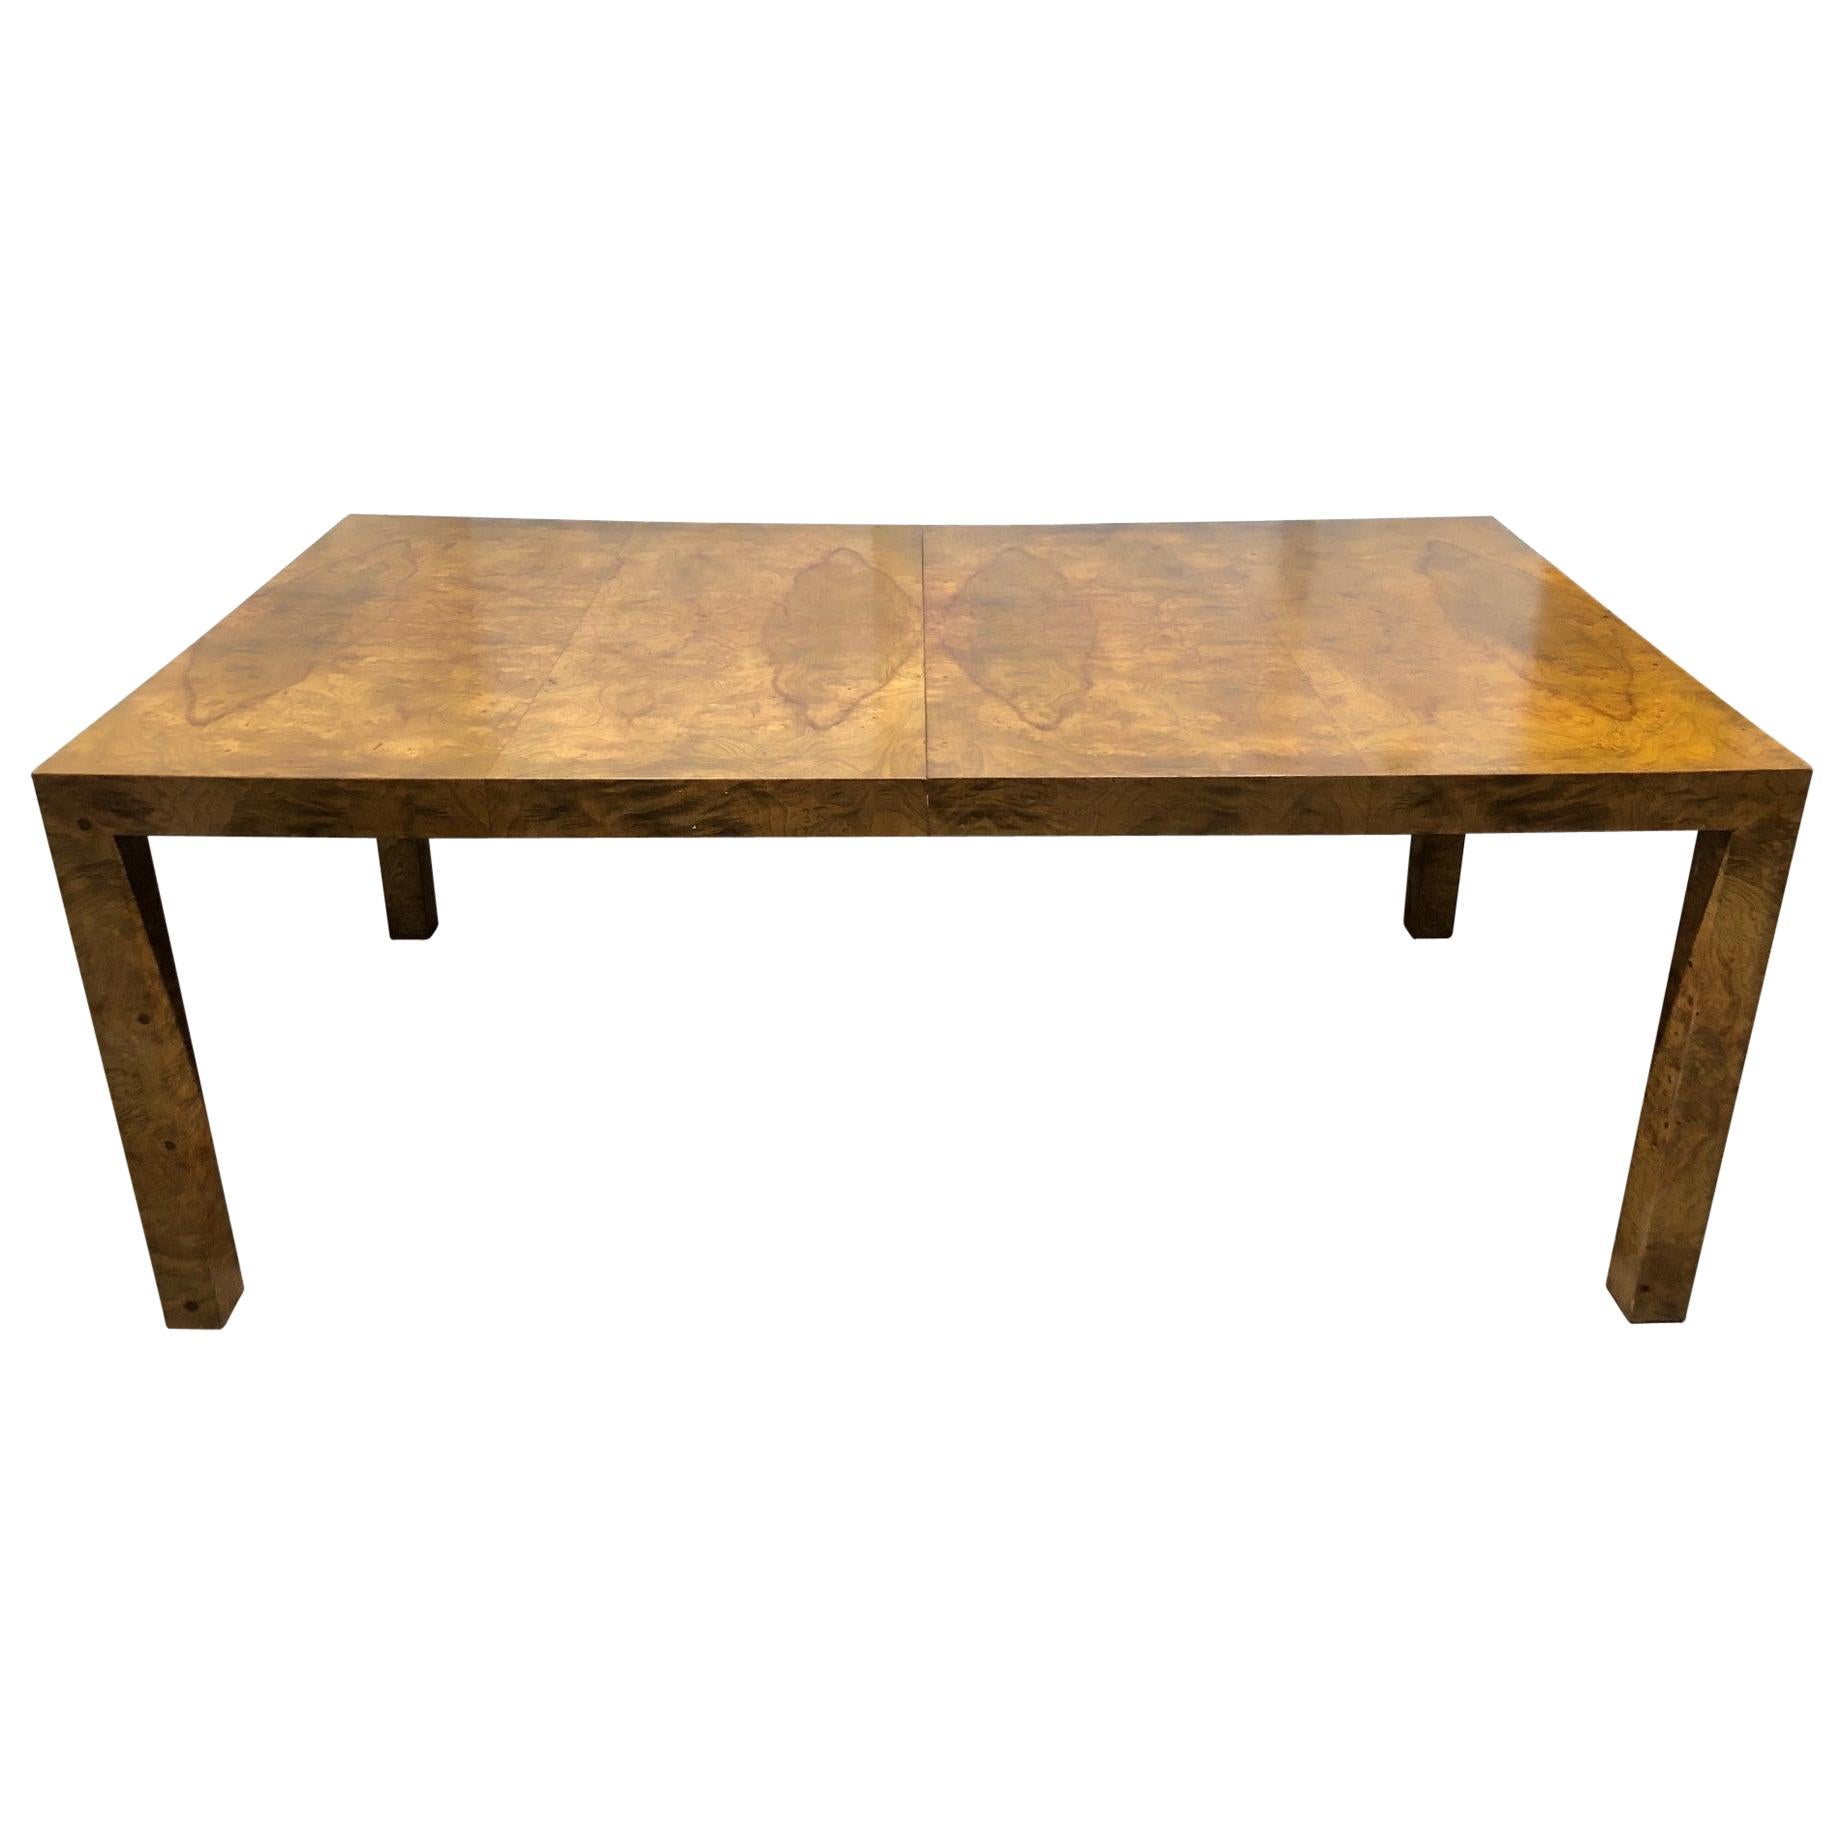 Milo Baughman Burl Wood Dining Table with Two Leaves